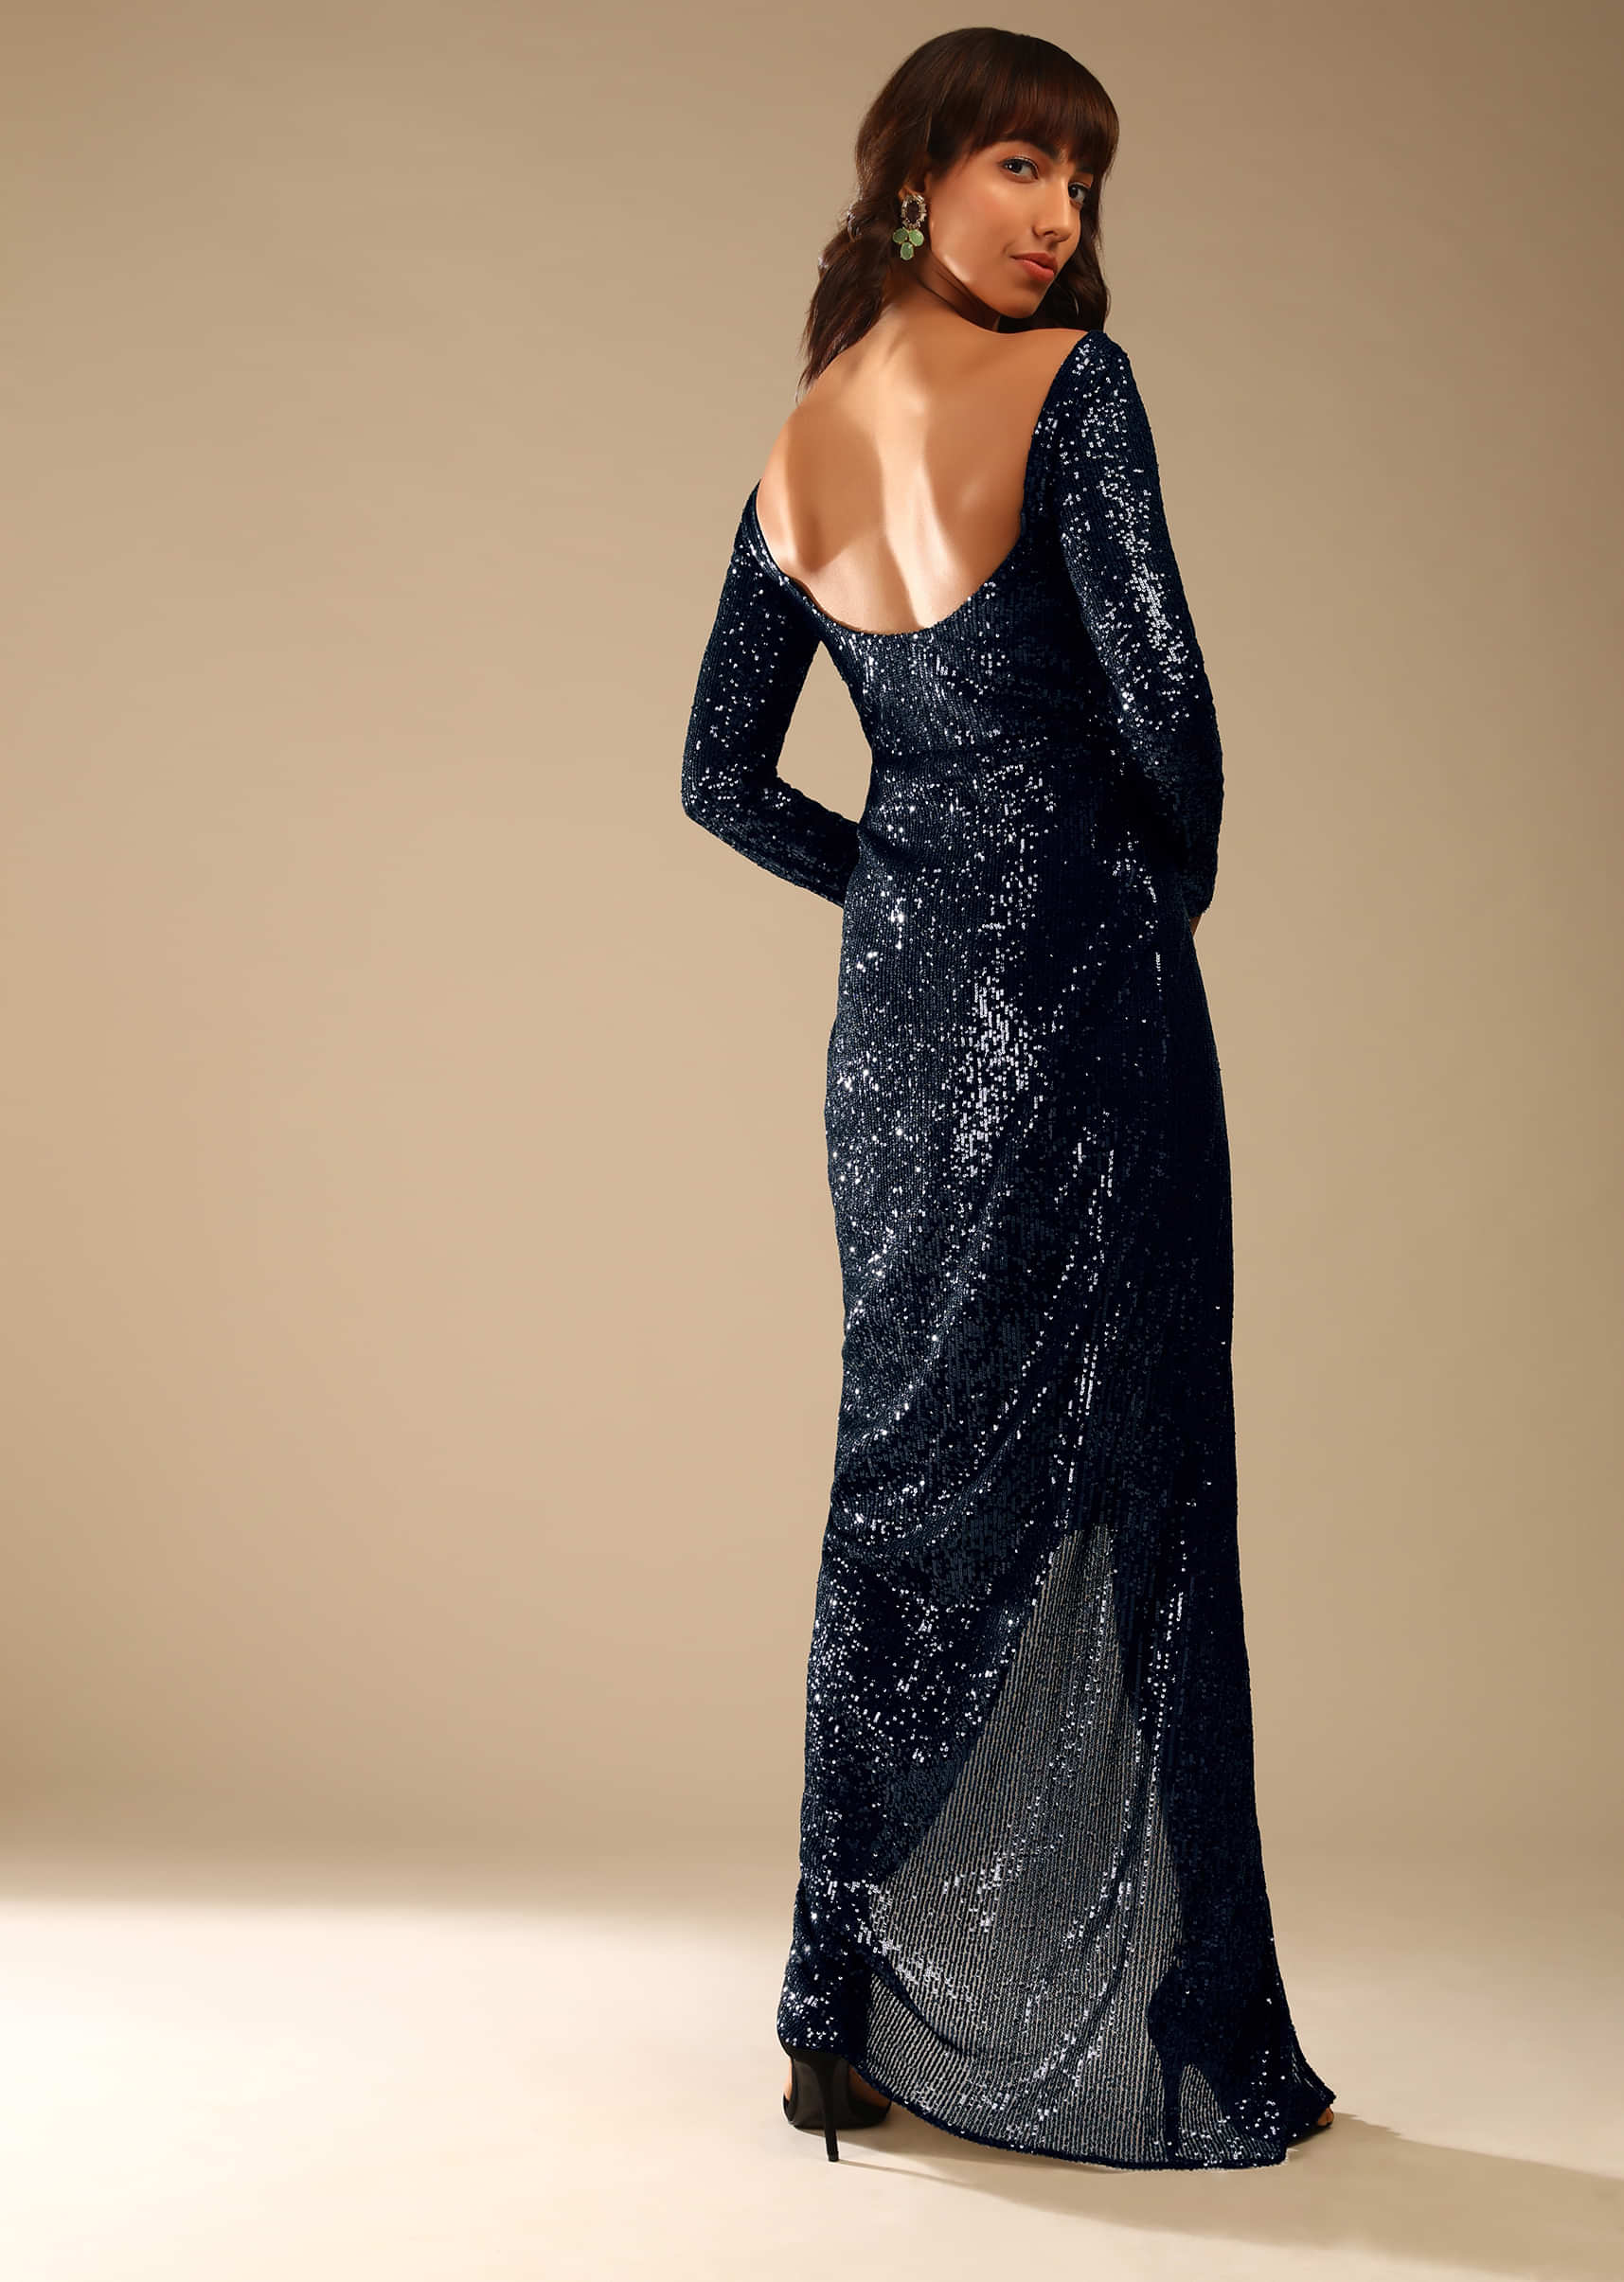 Navy Blue Gown Embellished In Sequins With Plunging Neckline And Cowl Draped Overlapping Slit